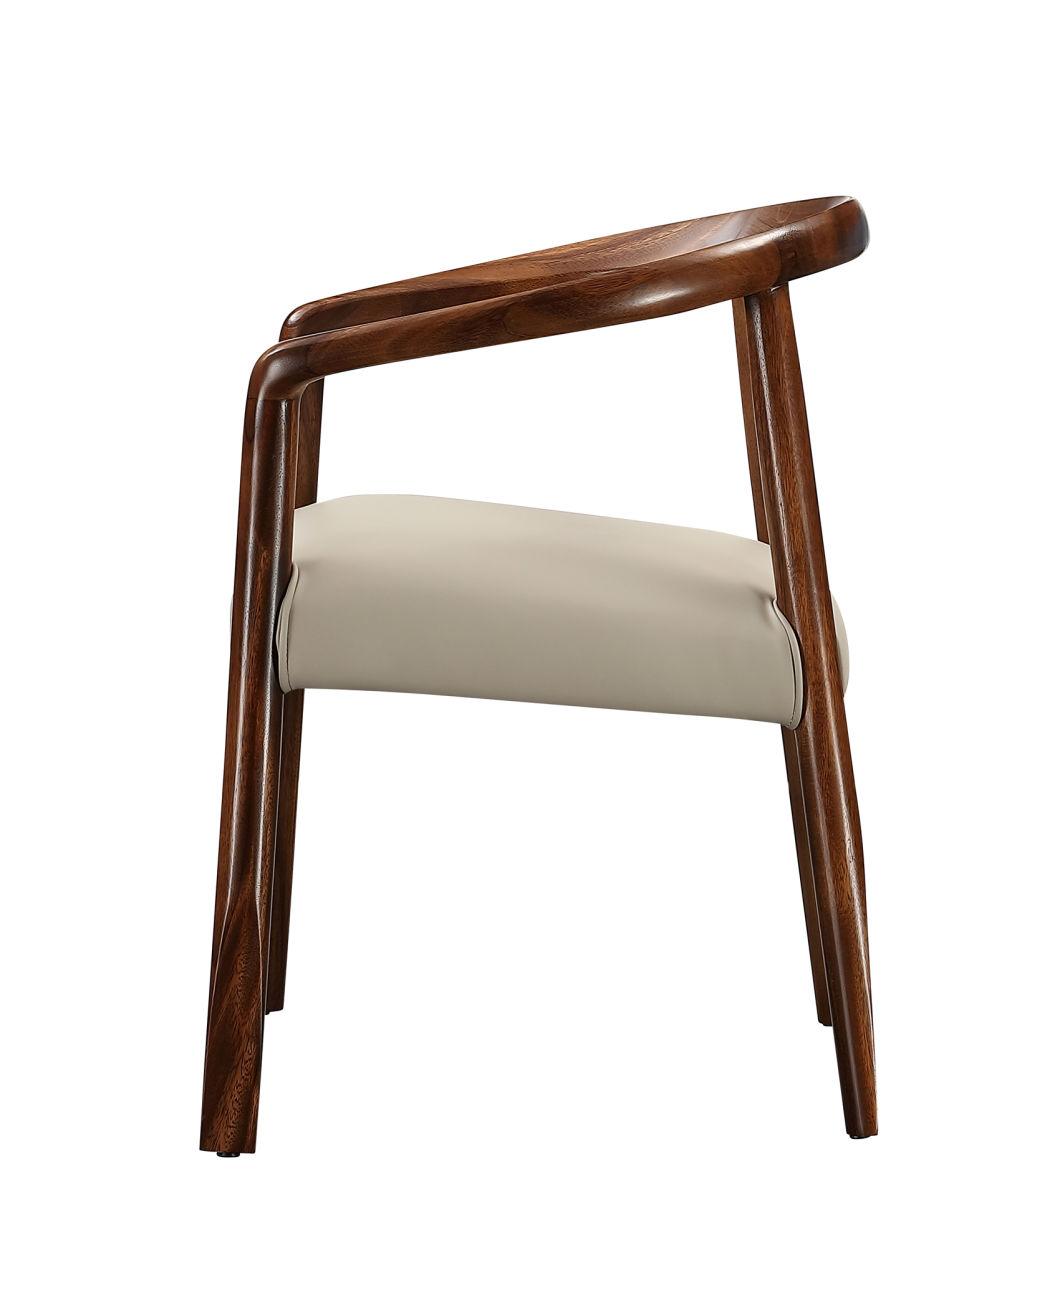 Hotel Restaurant Furniture Solid Wood Walnut Color Frame Dining Chair Bedroom Writing Desk Single Chair for Study Room